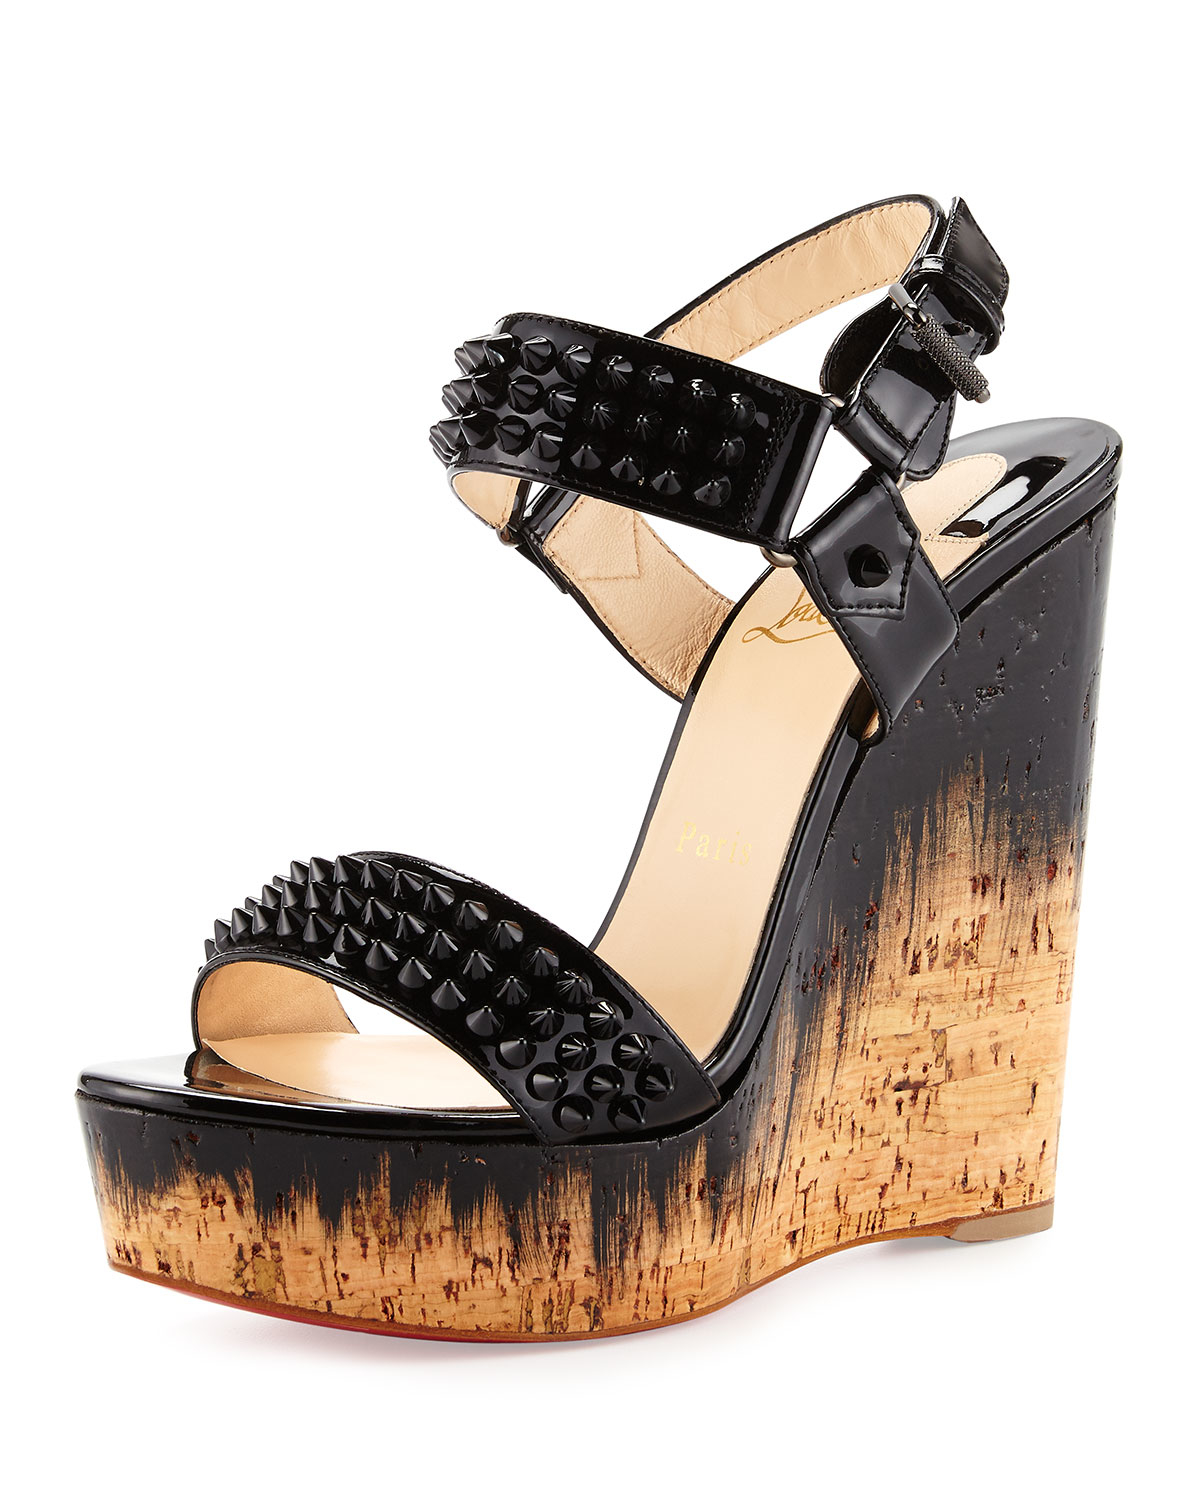 Christian louboutin Barboullaga Spiked Red Sole Wedge Sandal in Black ...